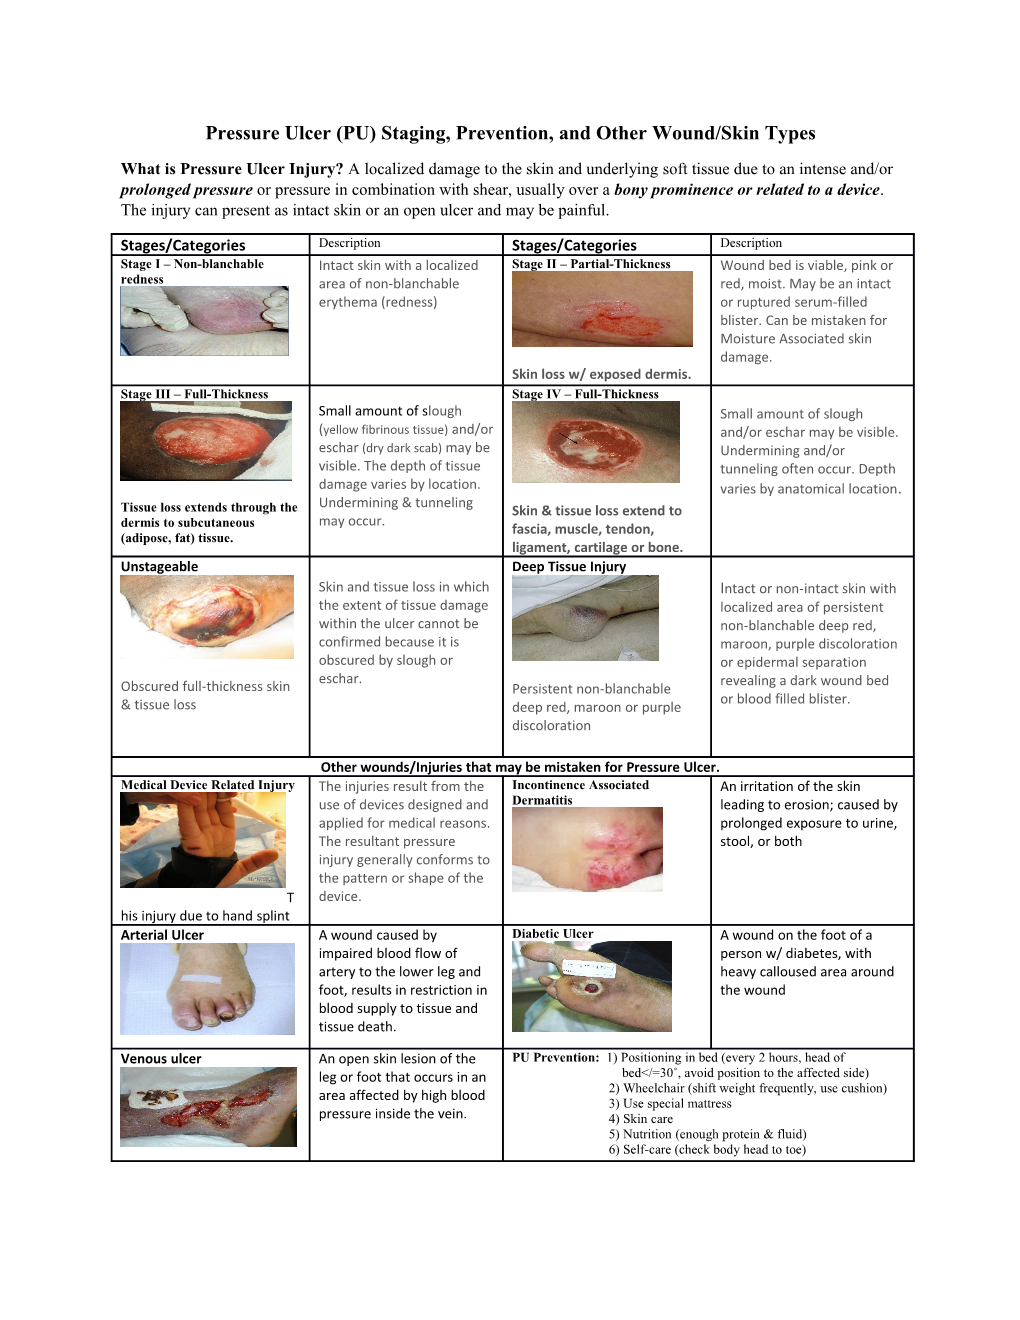 Pressure Ulcer (PU) Staging, Prevention, and Other Wound/Skin Types